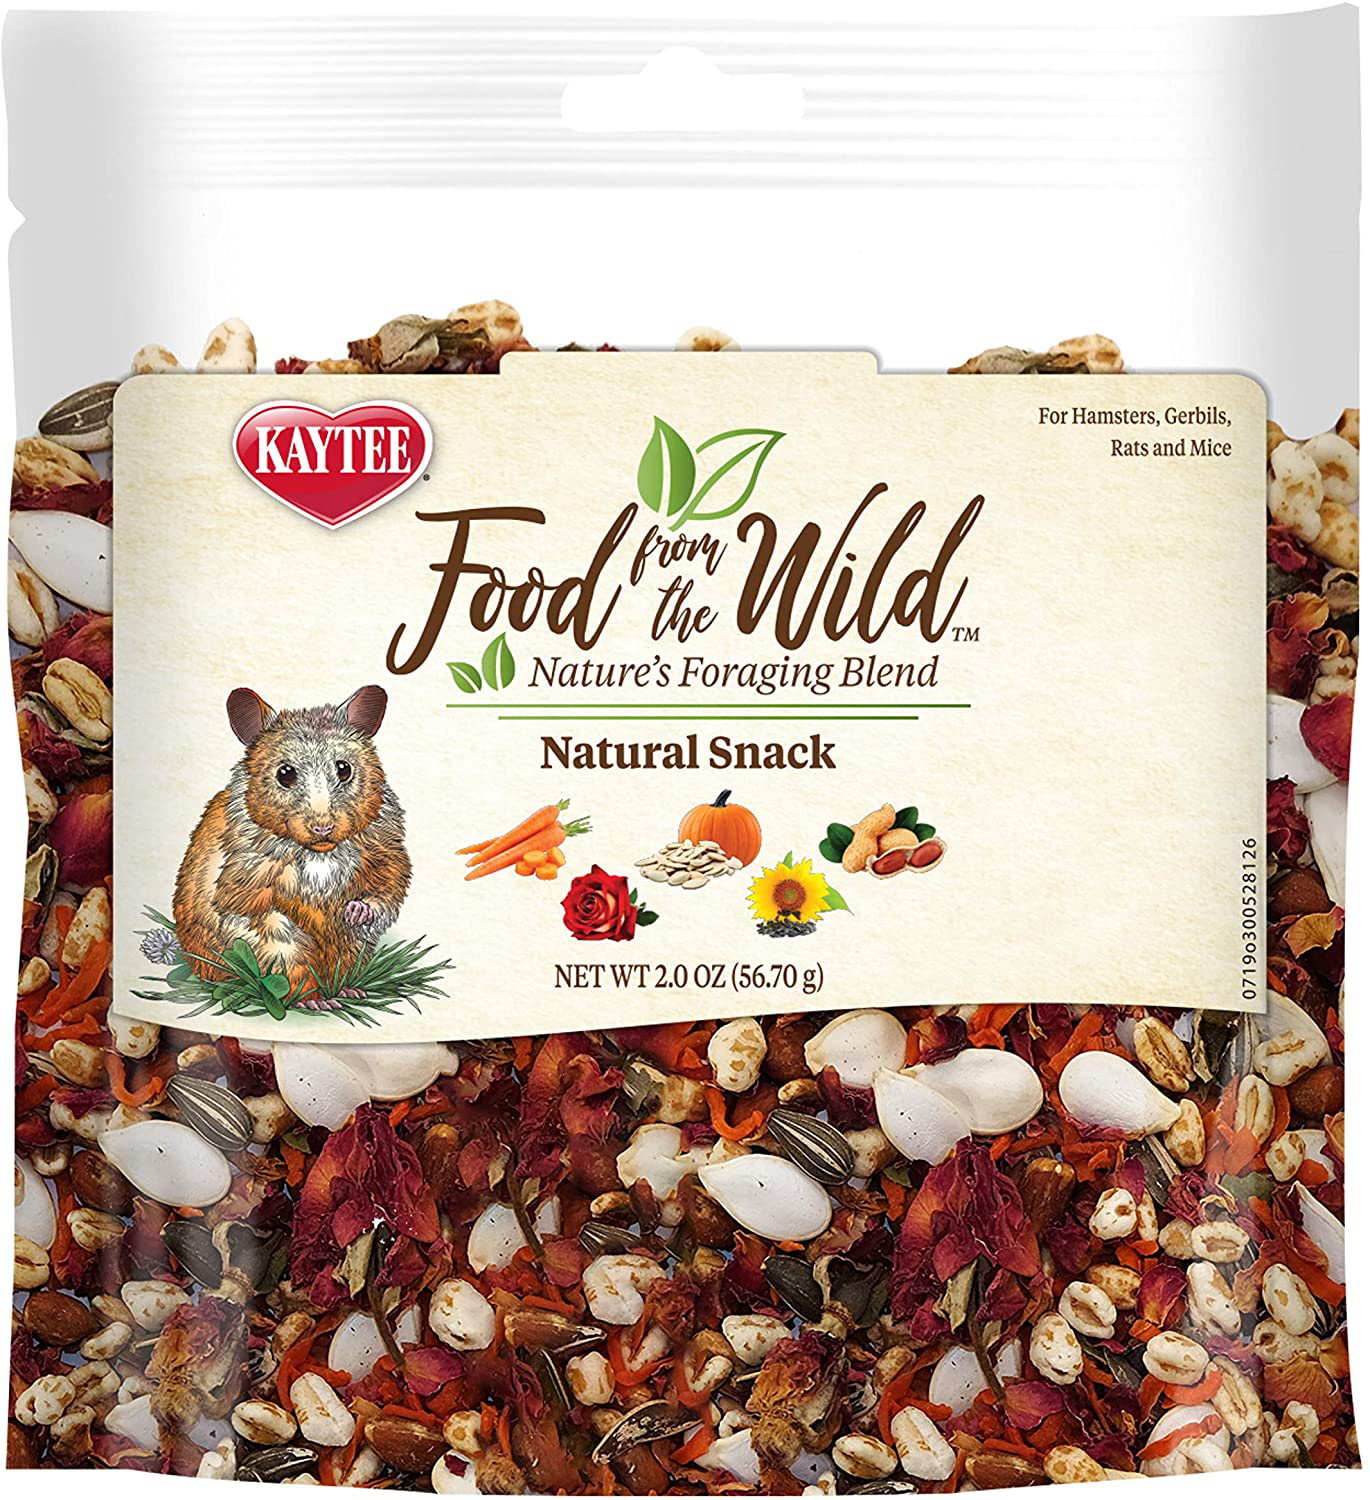 Kaytee Food from the Wild Natural Snack